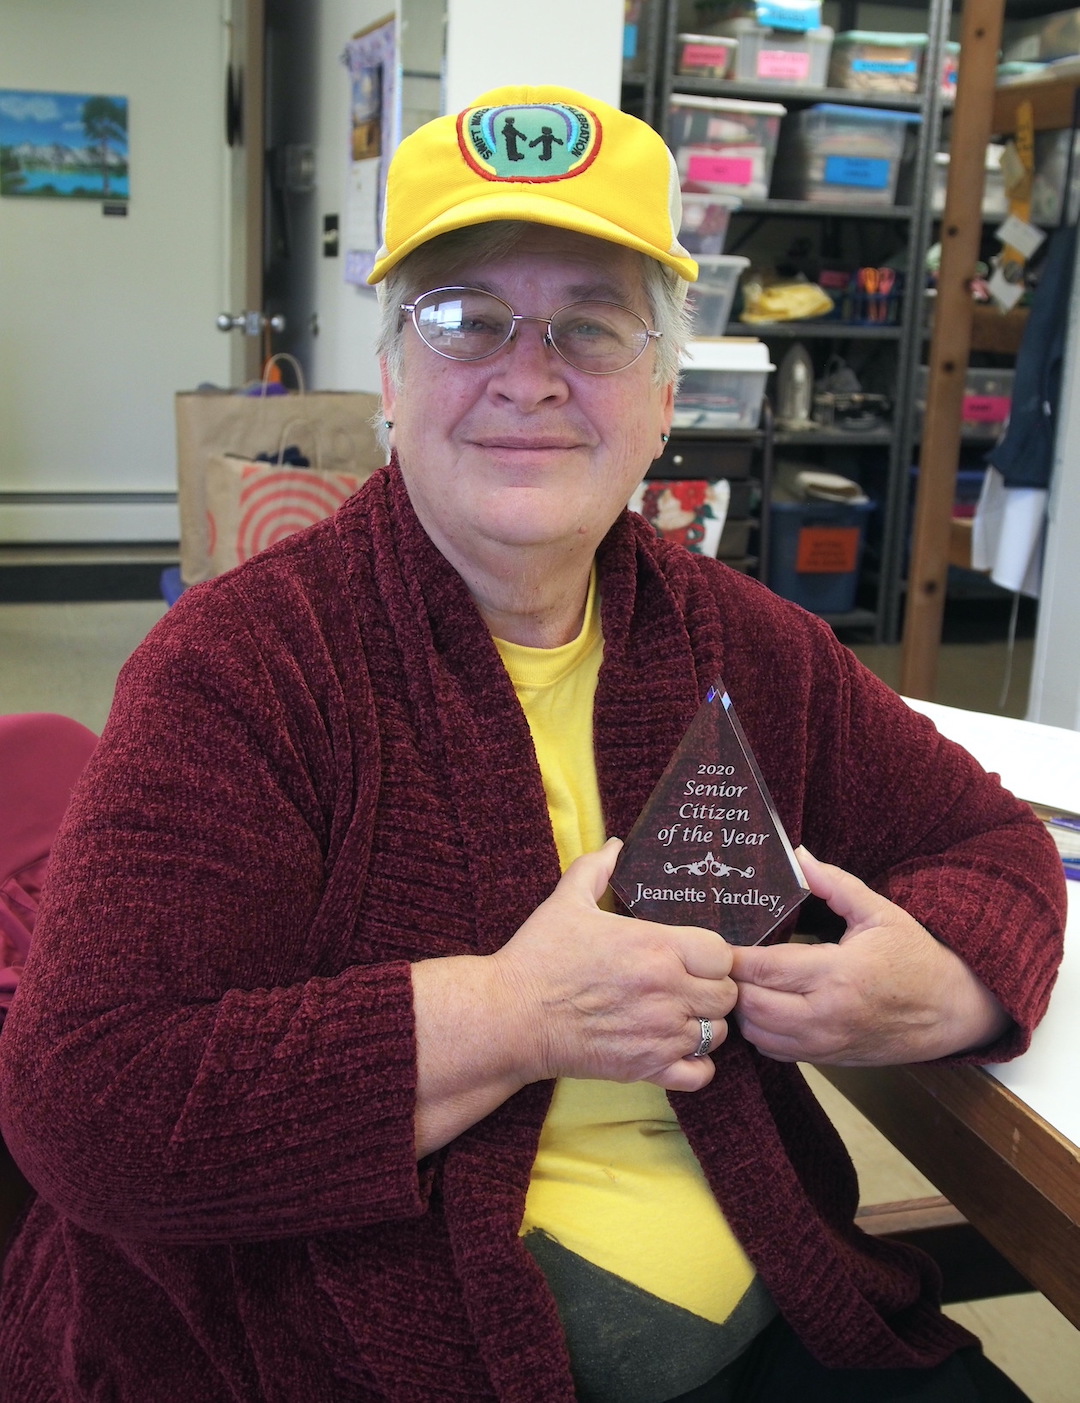 Jeanette `Jan` Yardley displays the award she received, recognizing her community service.